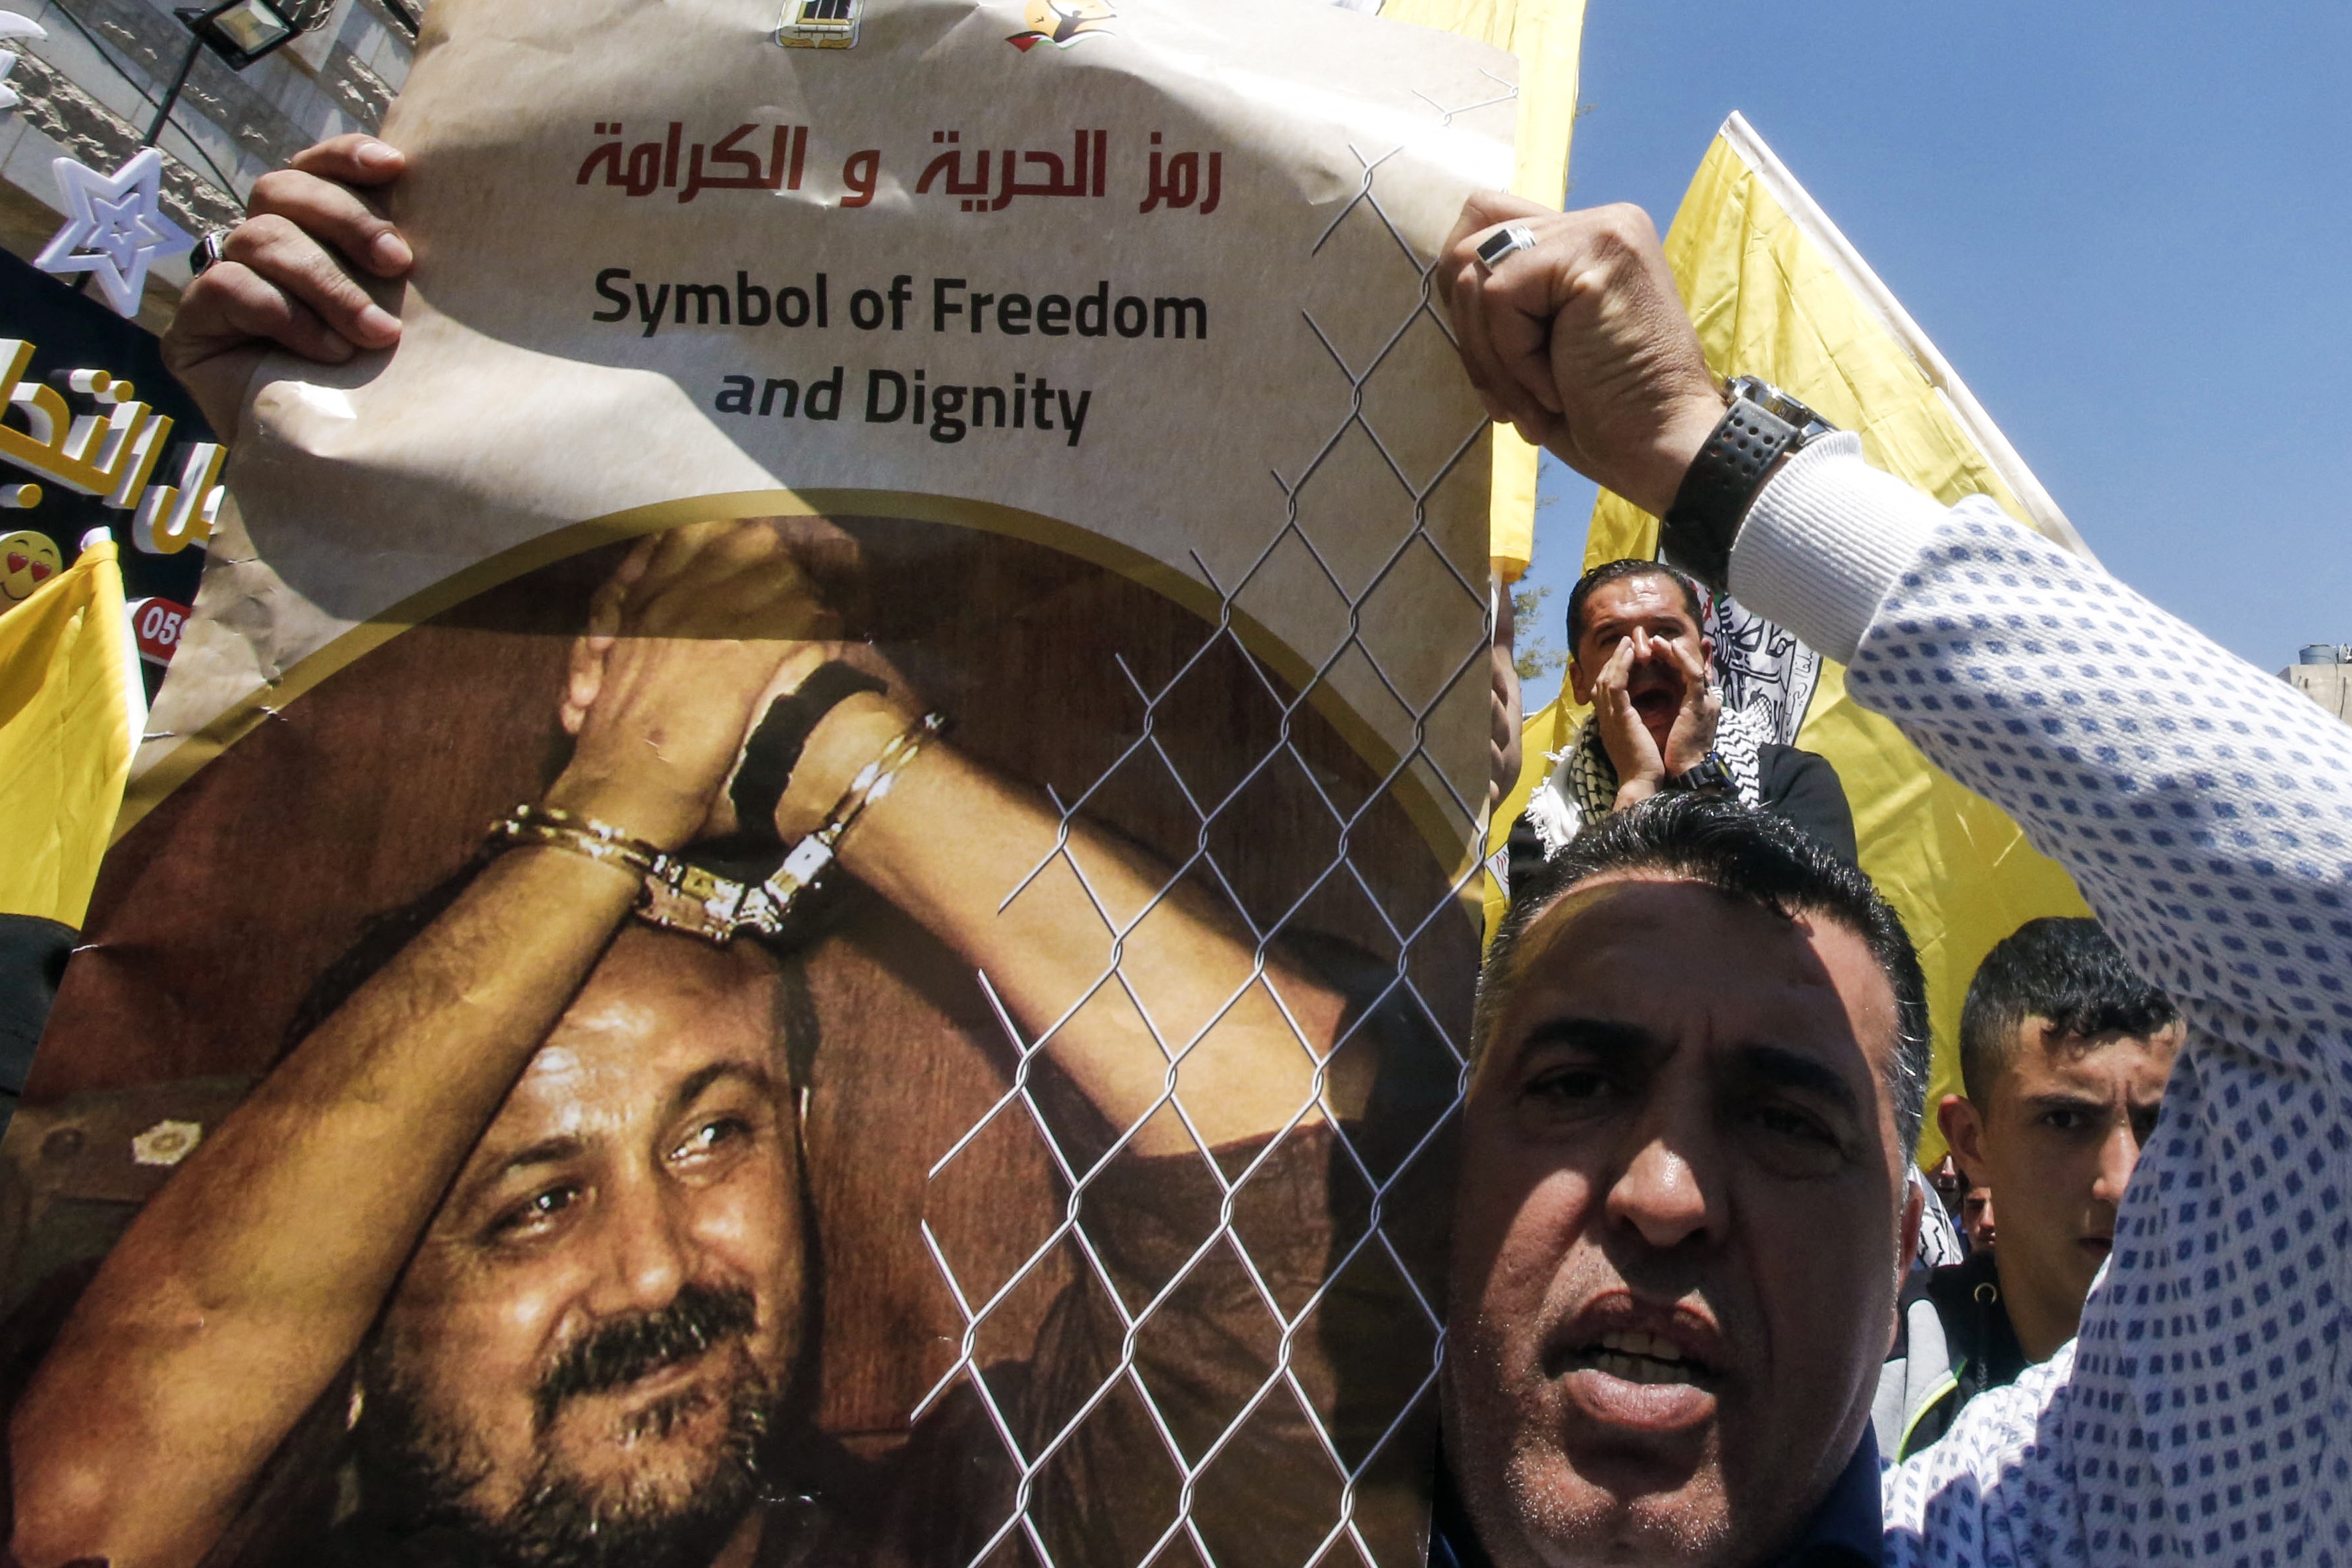 A man holds a photo of prominent Palestinian prisoner Marwan Barghouti calling for his release during a rally supporting those detained in Israeli jails after hundreds of them launched a hunger strike, in the West Bank town of Hebron on April 17, 2017